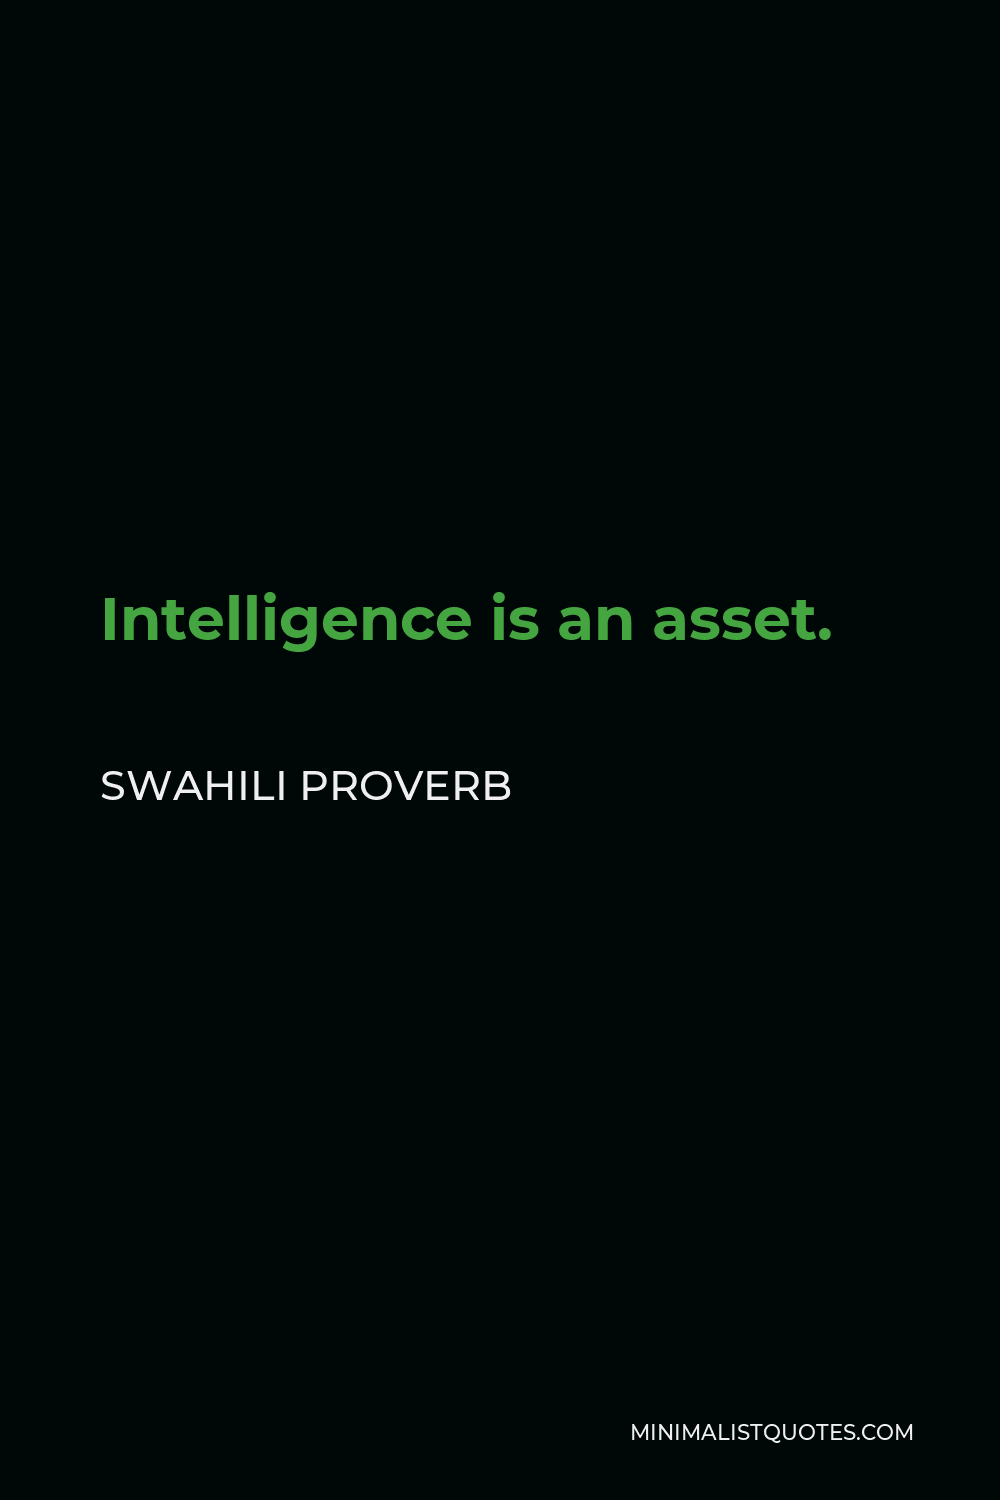 Swahili Proverb Quote - Intelligence is an asset.